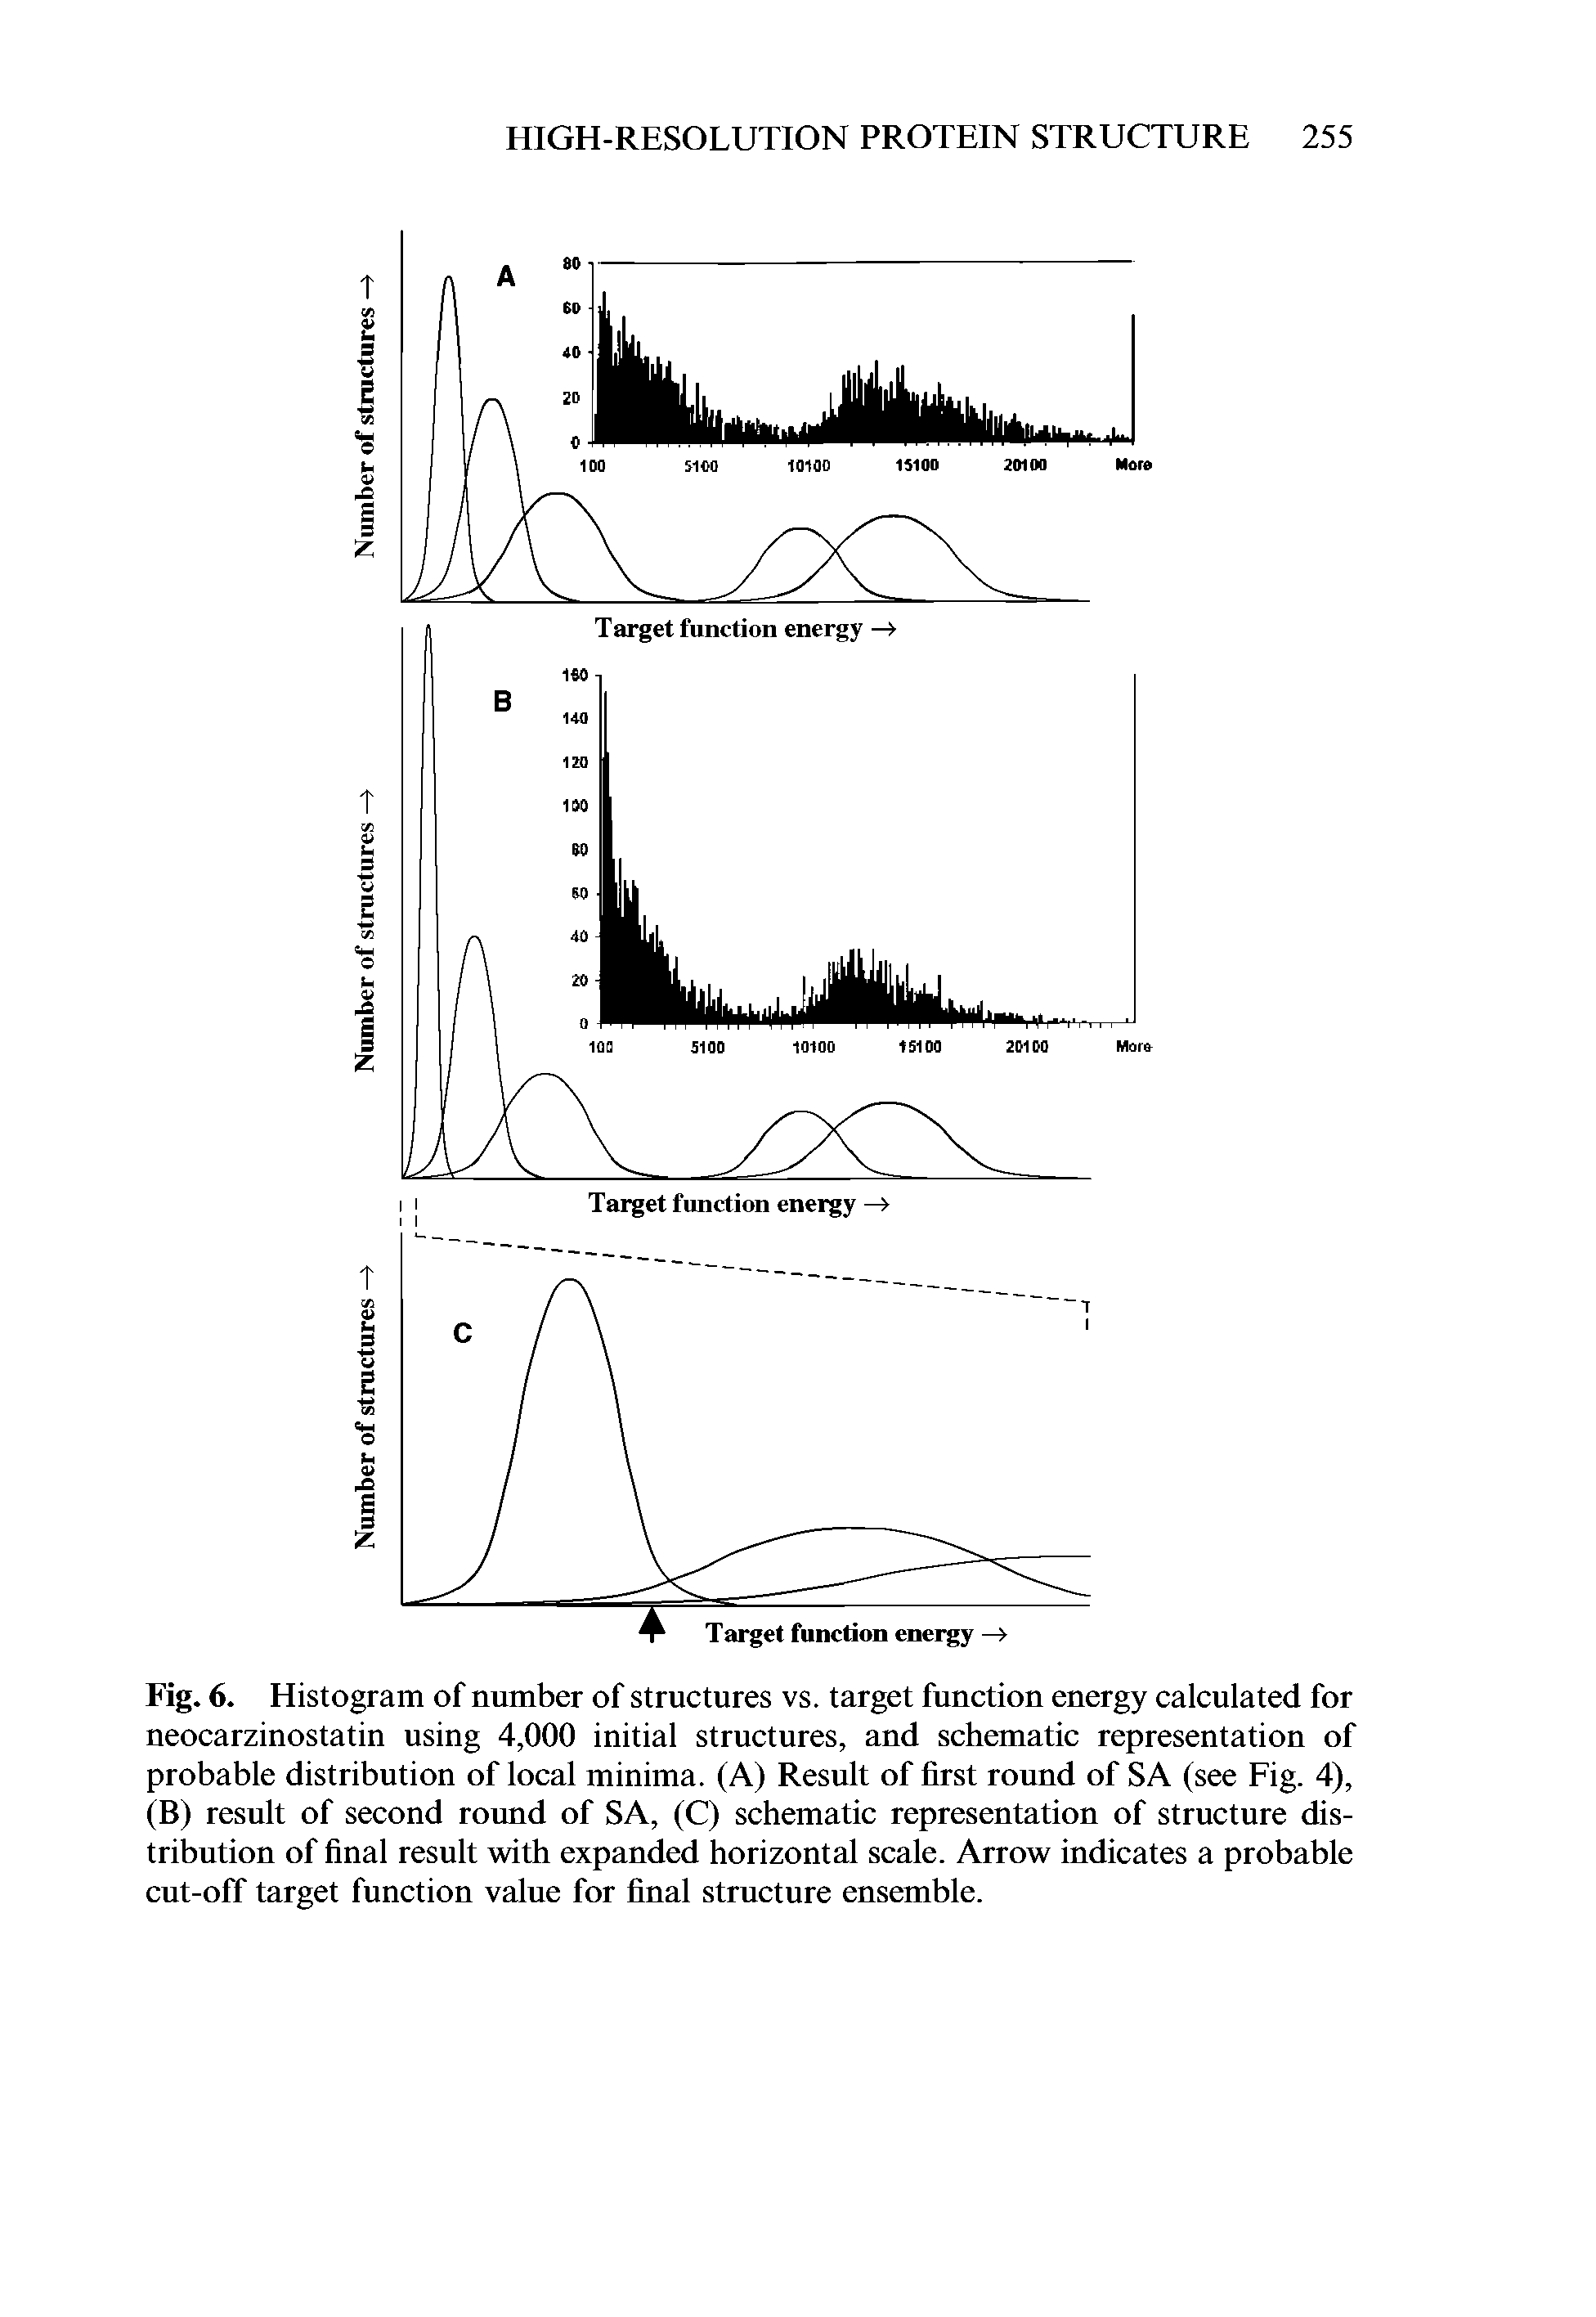 Fig. 6. Histogram of number of structures vs. target function energy calculated for neocarzinostatin using 4,000 initial structures, and schematic representation of probable distribution of local minima. (A) Result of first round of SA (see Fig. 4), (B) result of second round of SA, (C) schematic representation of structure distribution of final result with expanded horizontal scale. Arrow indicates a probable cut-off target function value for final structure ensemble.